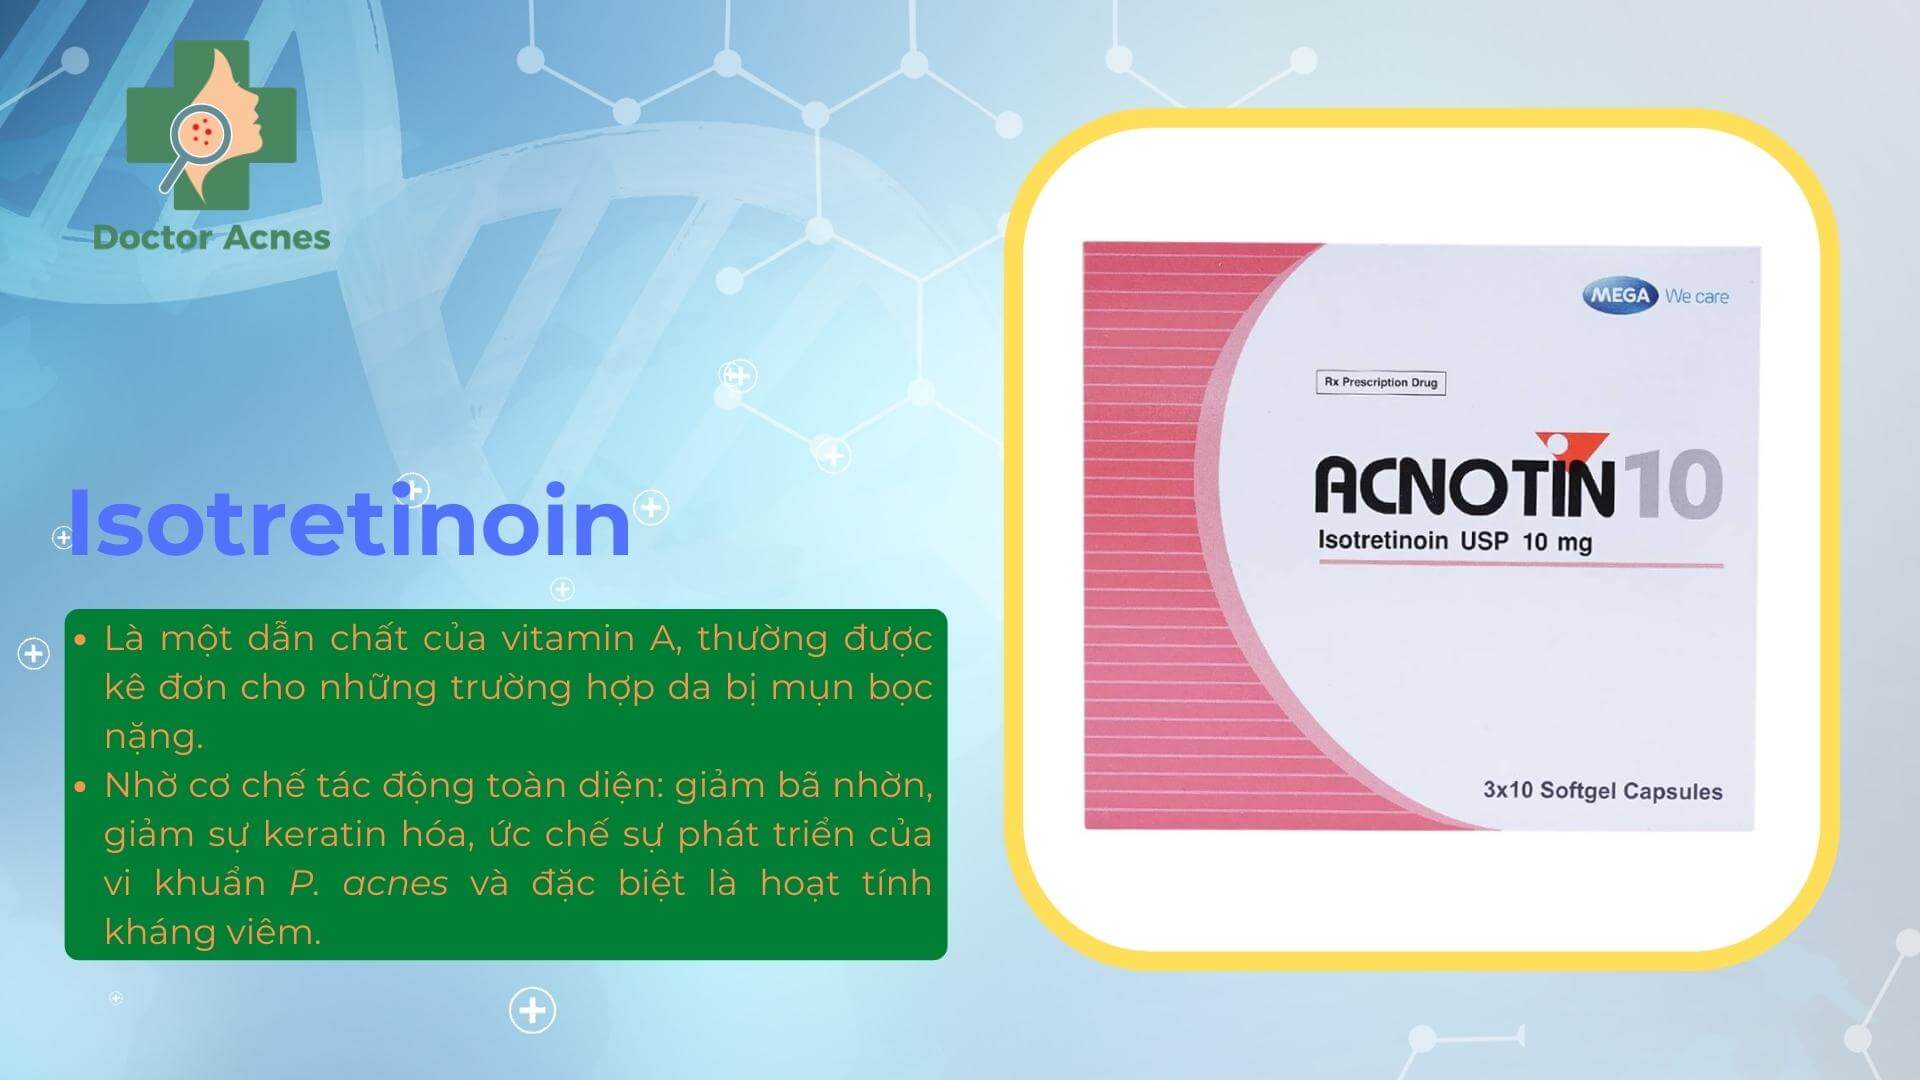 Isotretinoin - Doctor Acnes